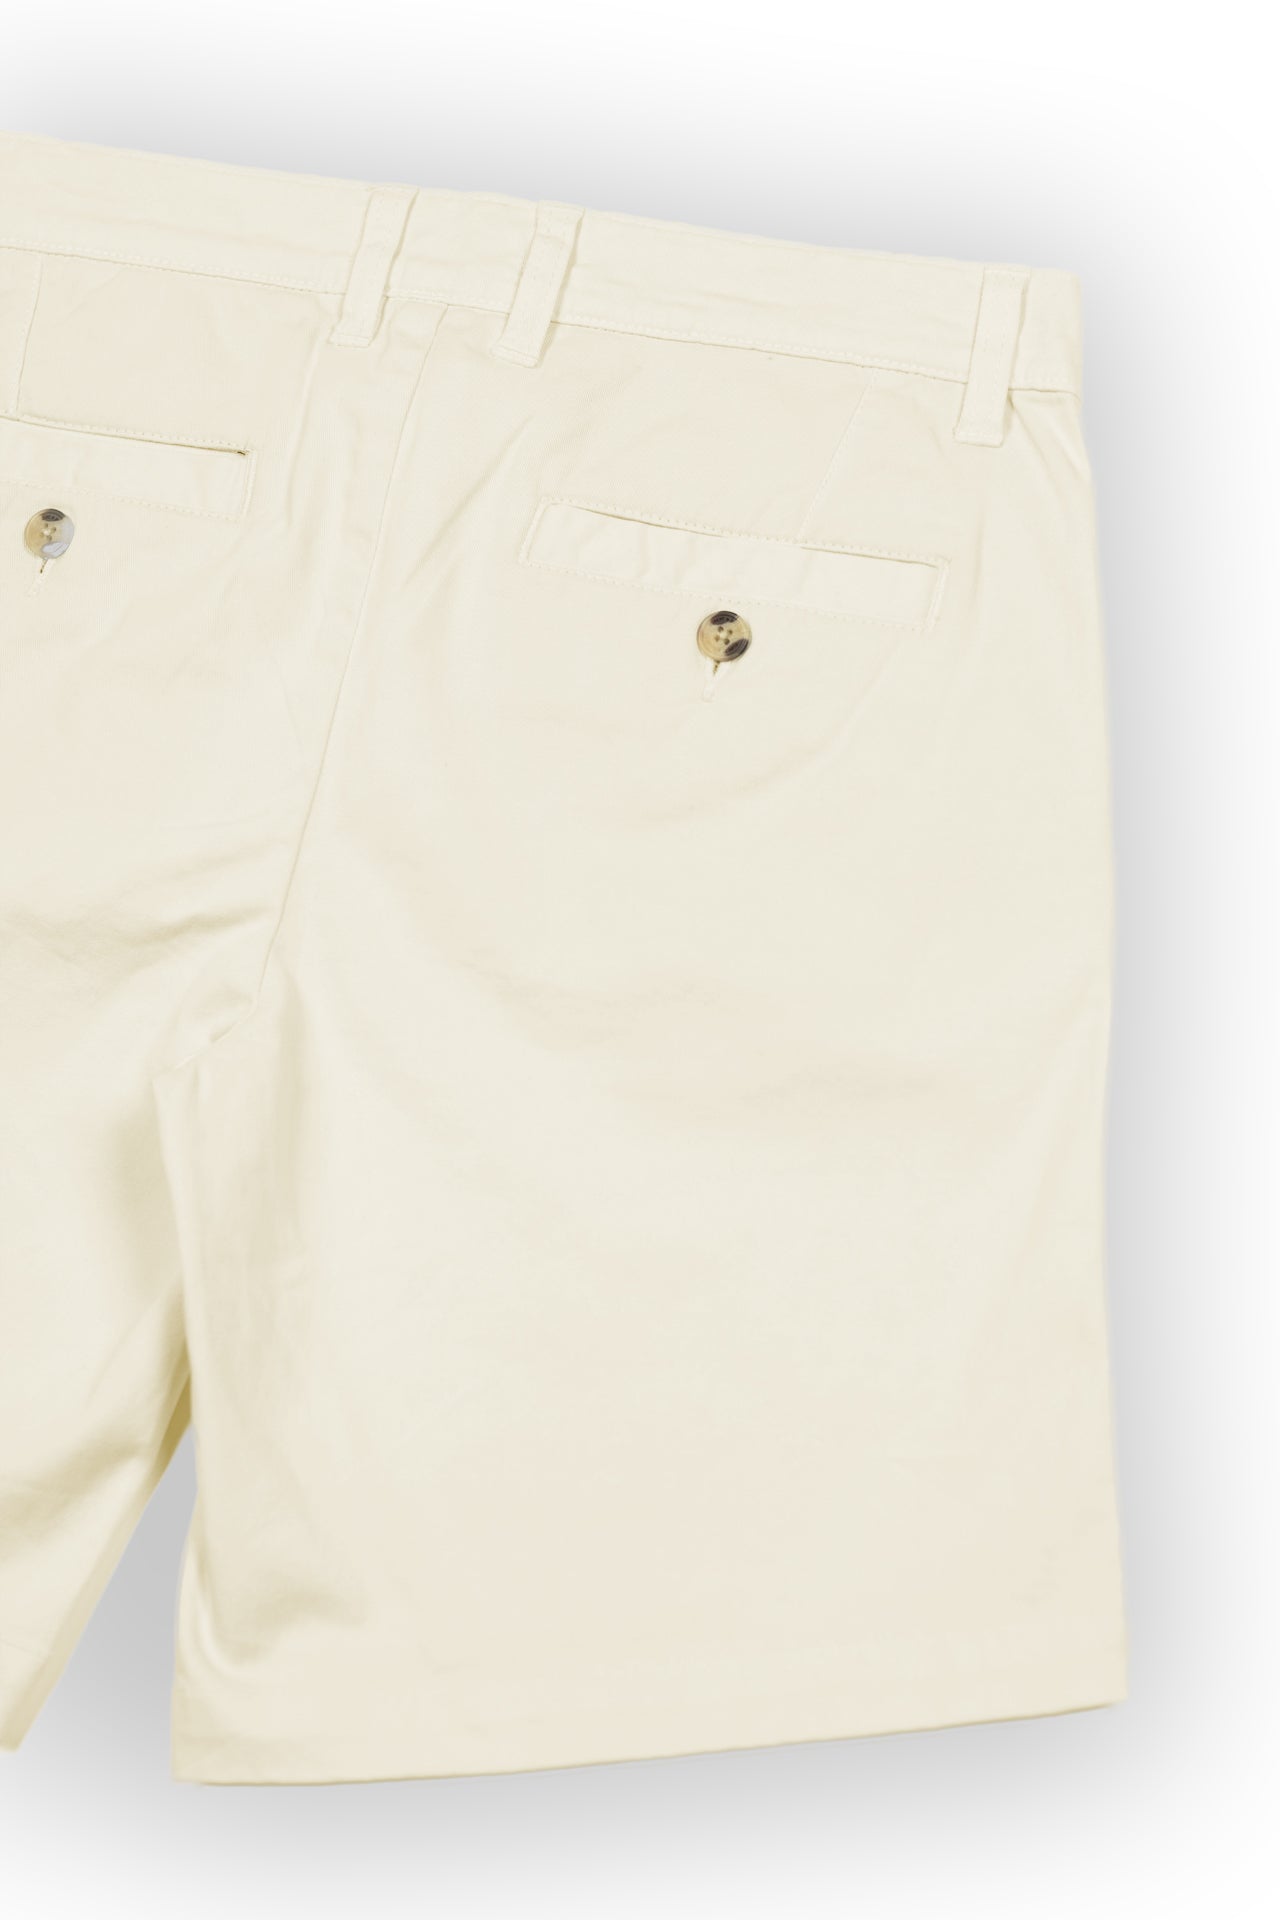 Abigail Off White Chino Shorts - Rupert and Buckley - Shorts